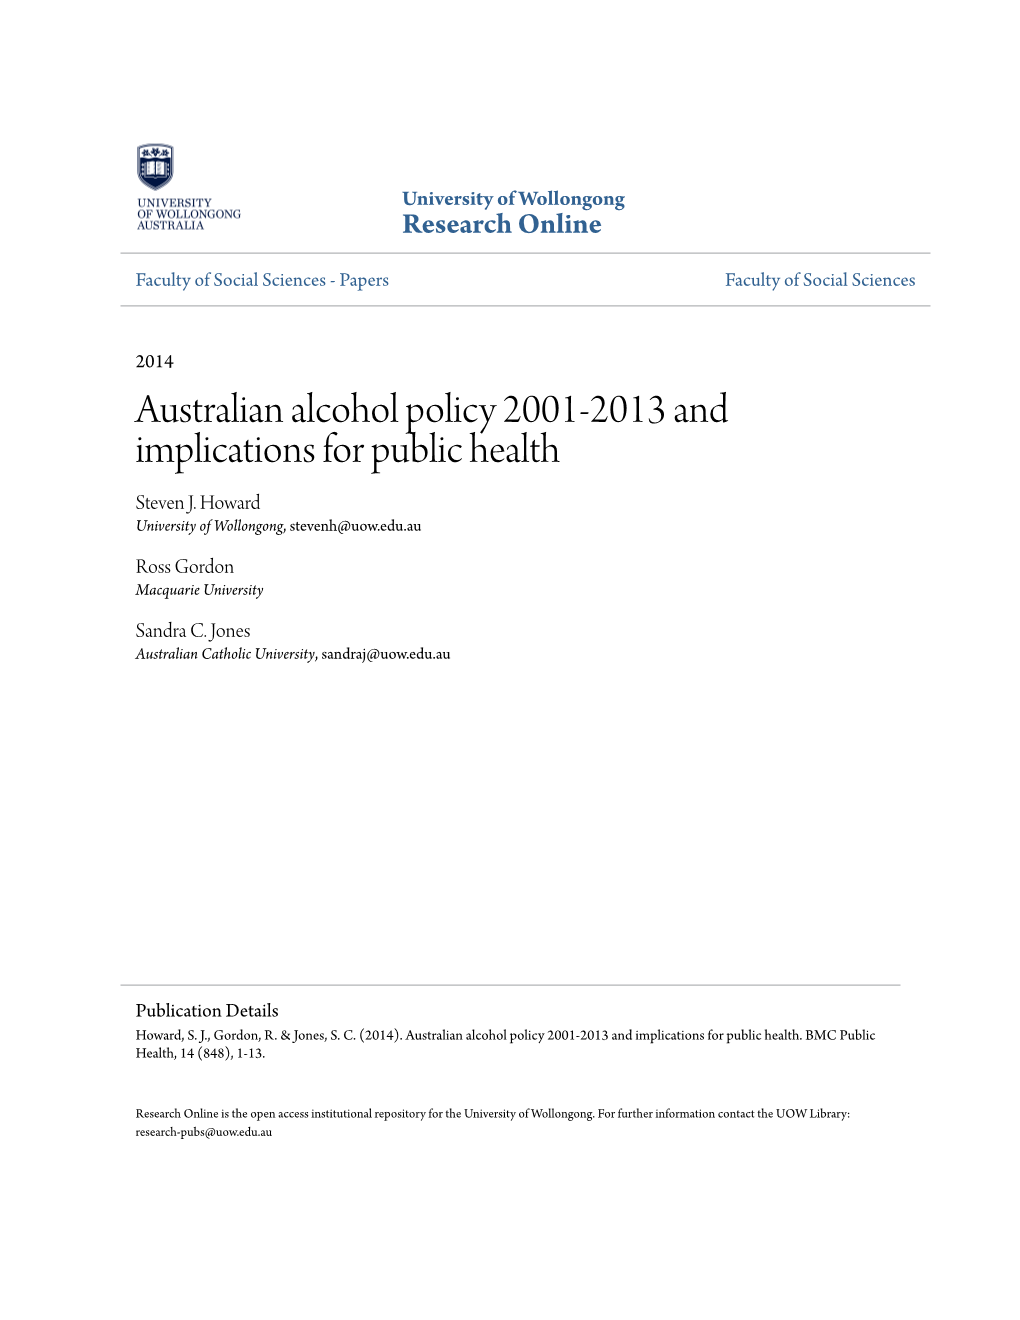 Australian Alcohol Policy 2001-2013 and Implications for Public Health Steven J